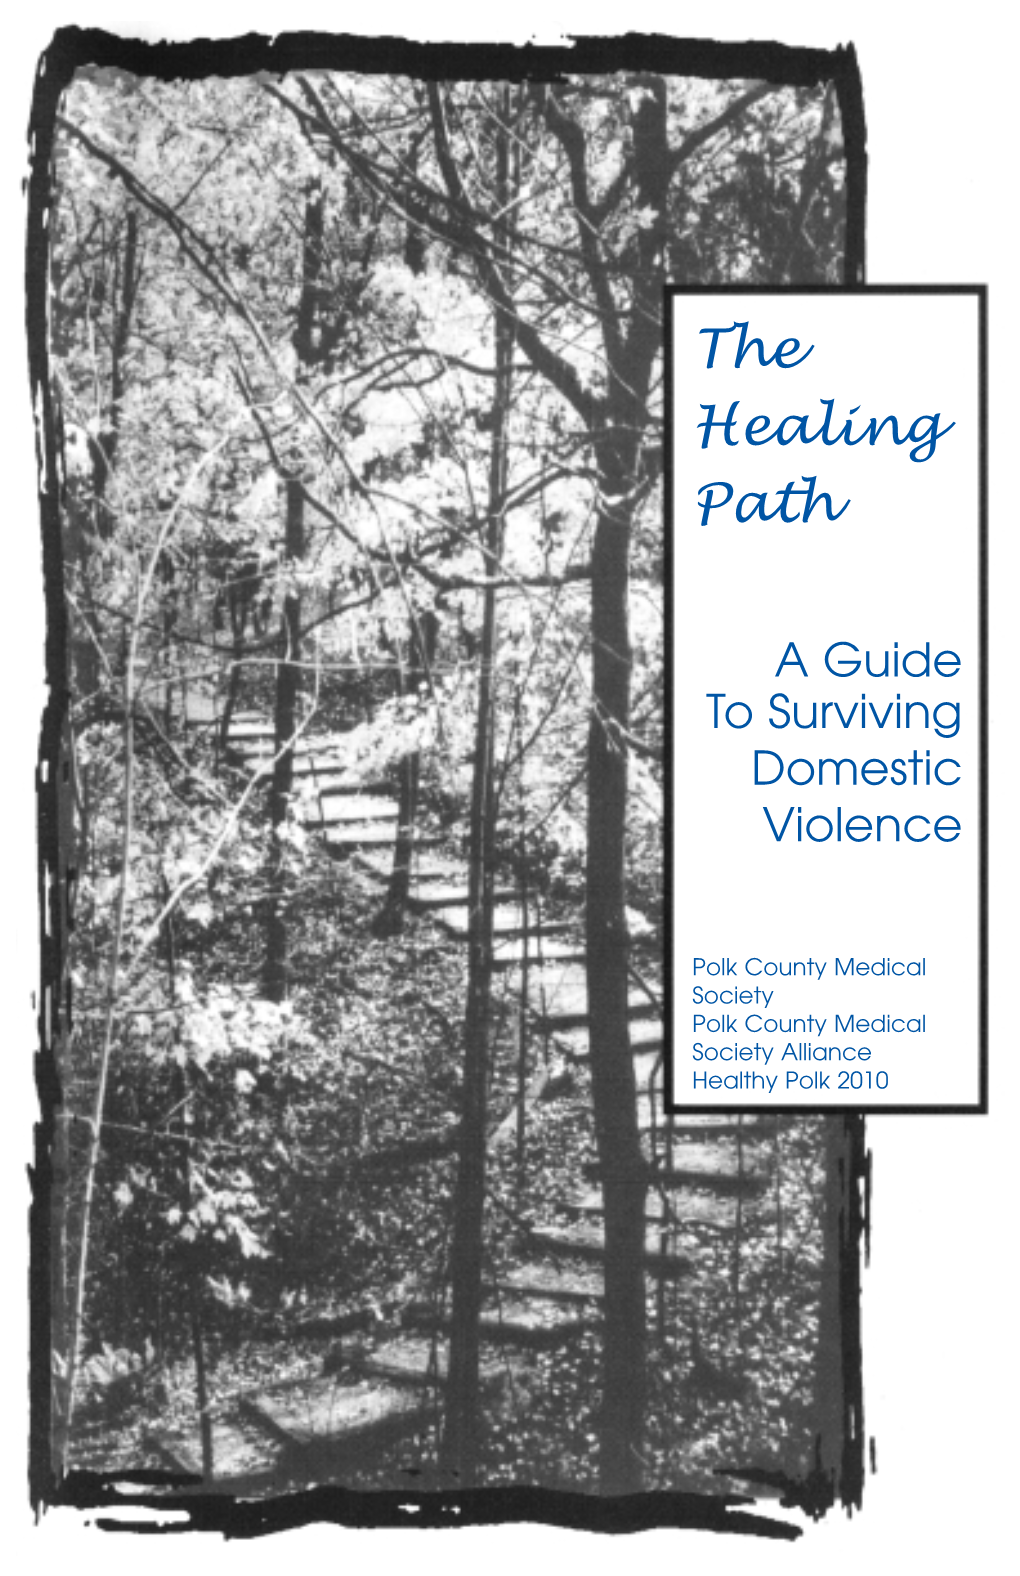 The Healing Path: a Guide to Surviving Domestic Violence